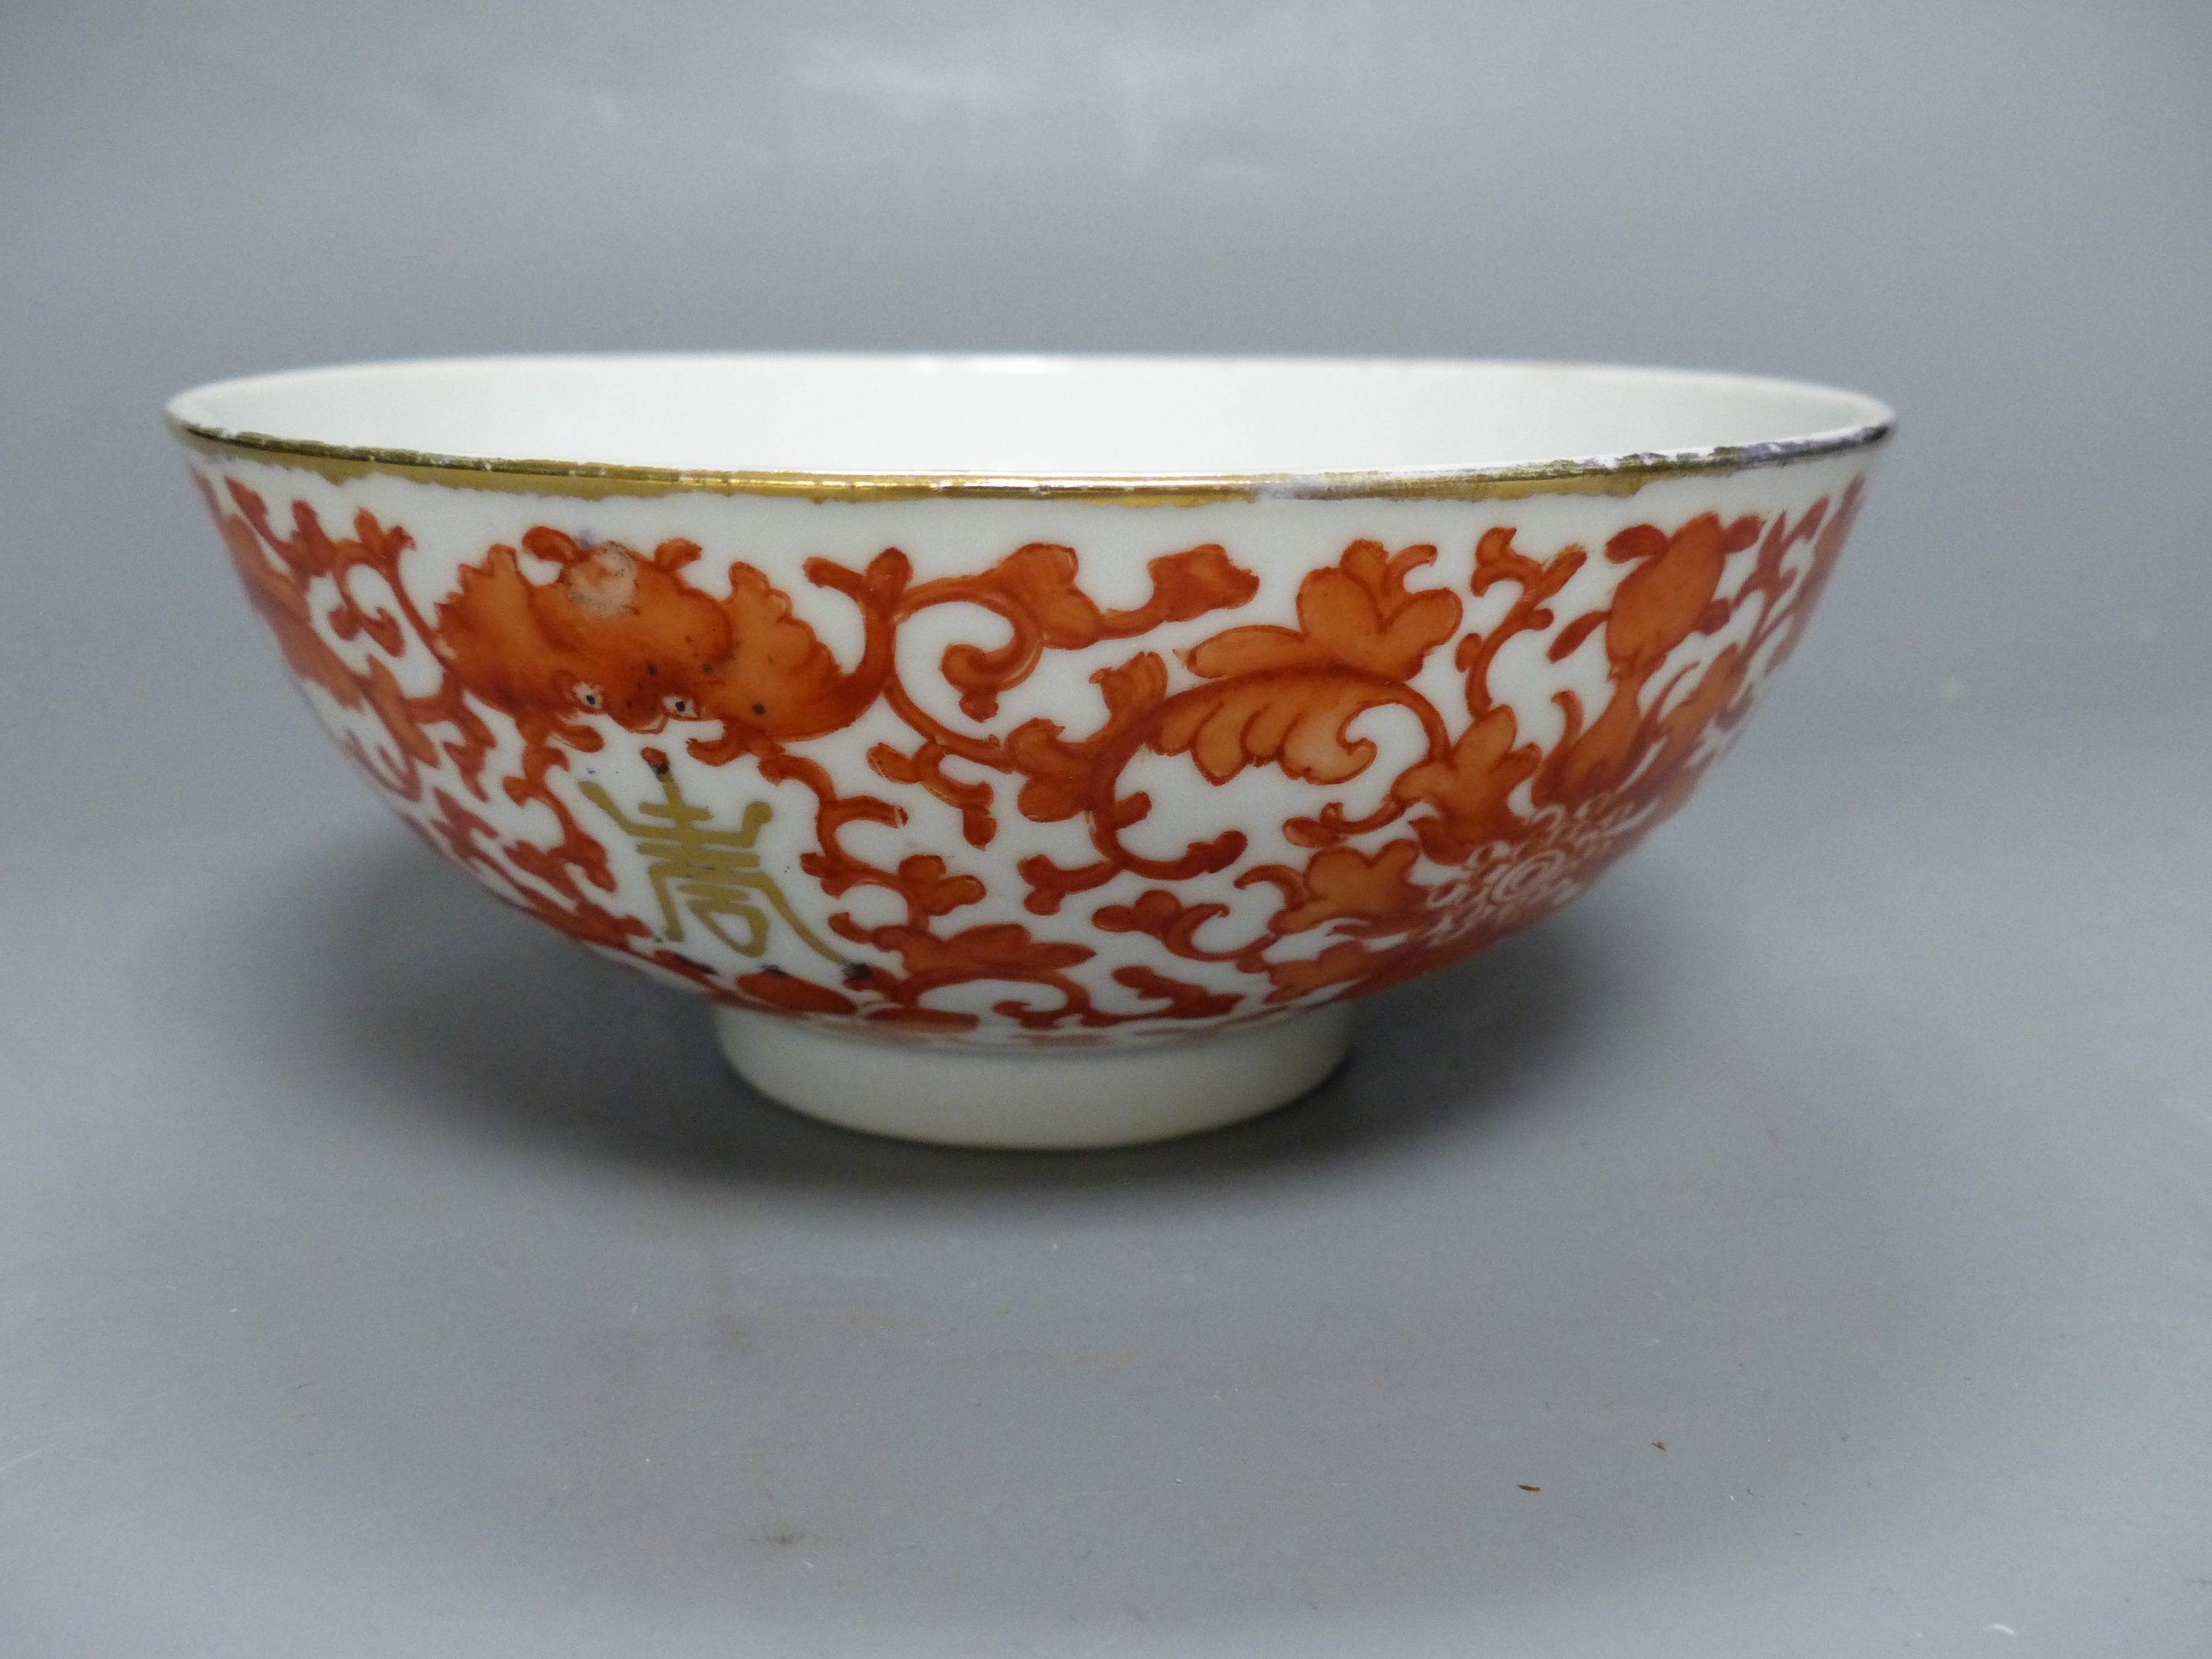 An early 20th century Chinese iron red bowl, diameter 15.5cm